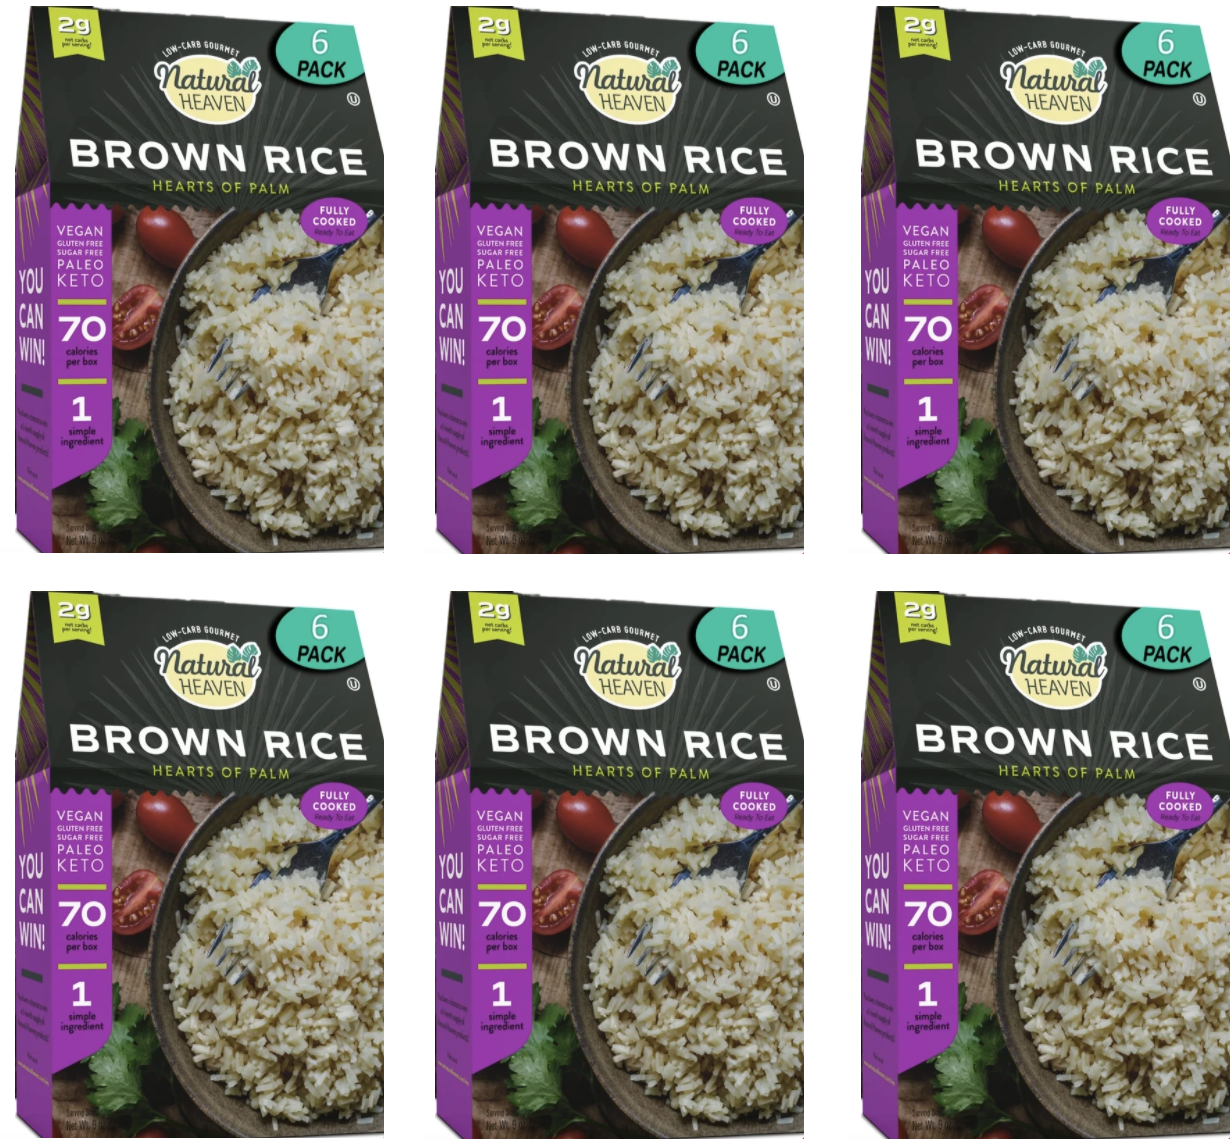 Brown Rice Hearts of Palm by Natural Heaven - High-quality Rice by Natural Heaven at 